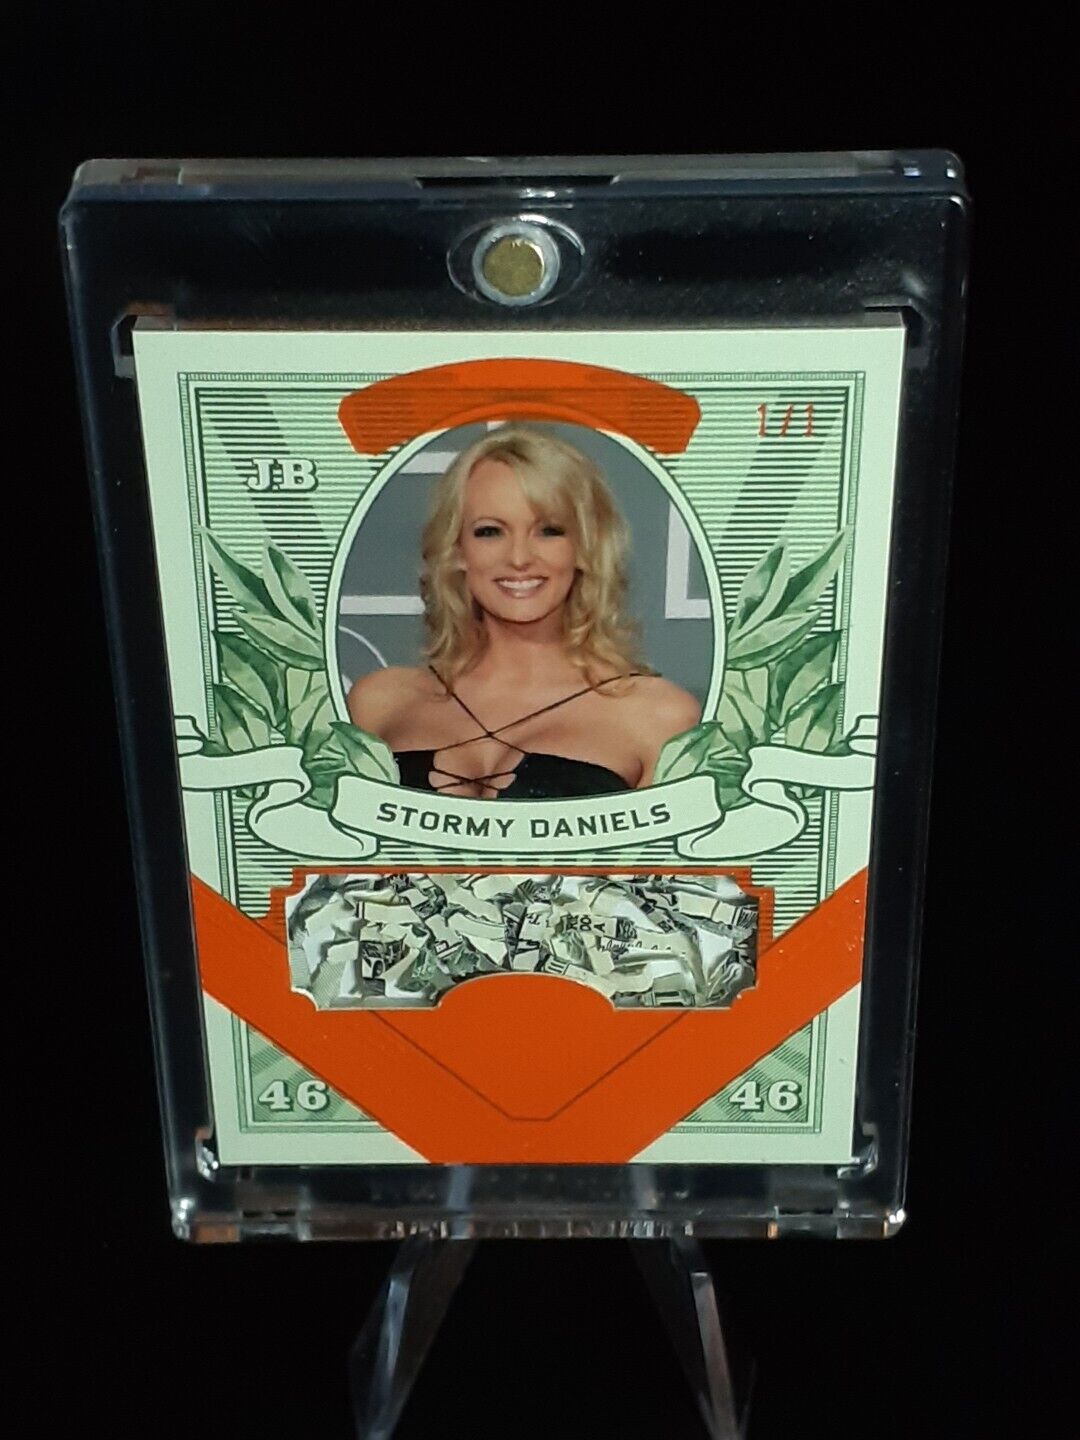 DECISION 2022 1/1 STORMY DANIELS HUSH MONEY CARD M033 AKA ELECTION INTERFERENCE